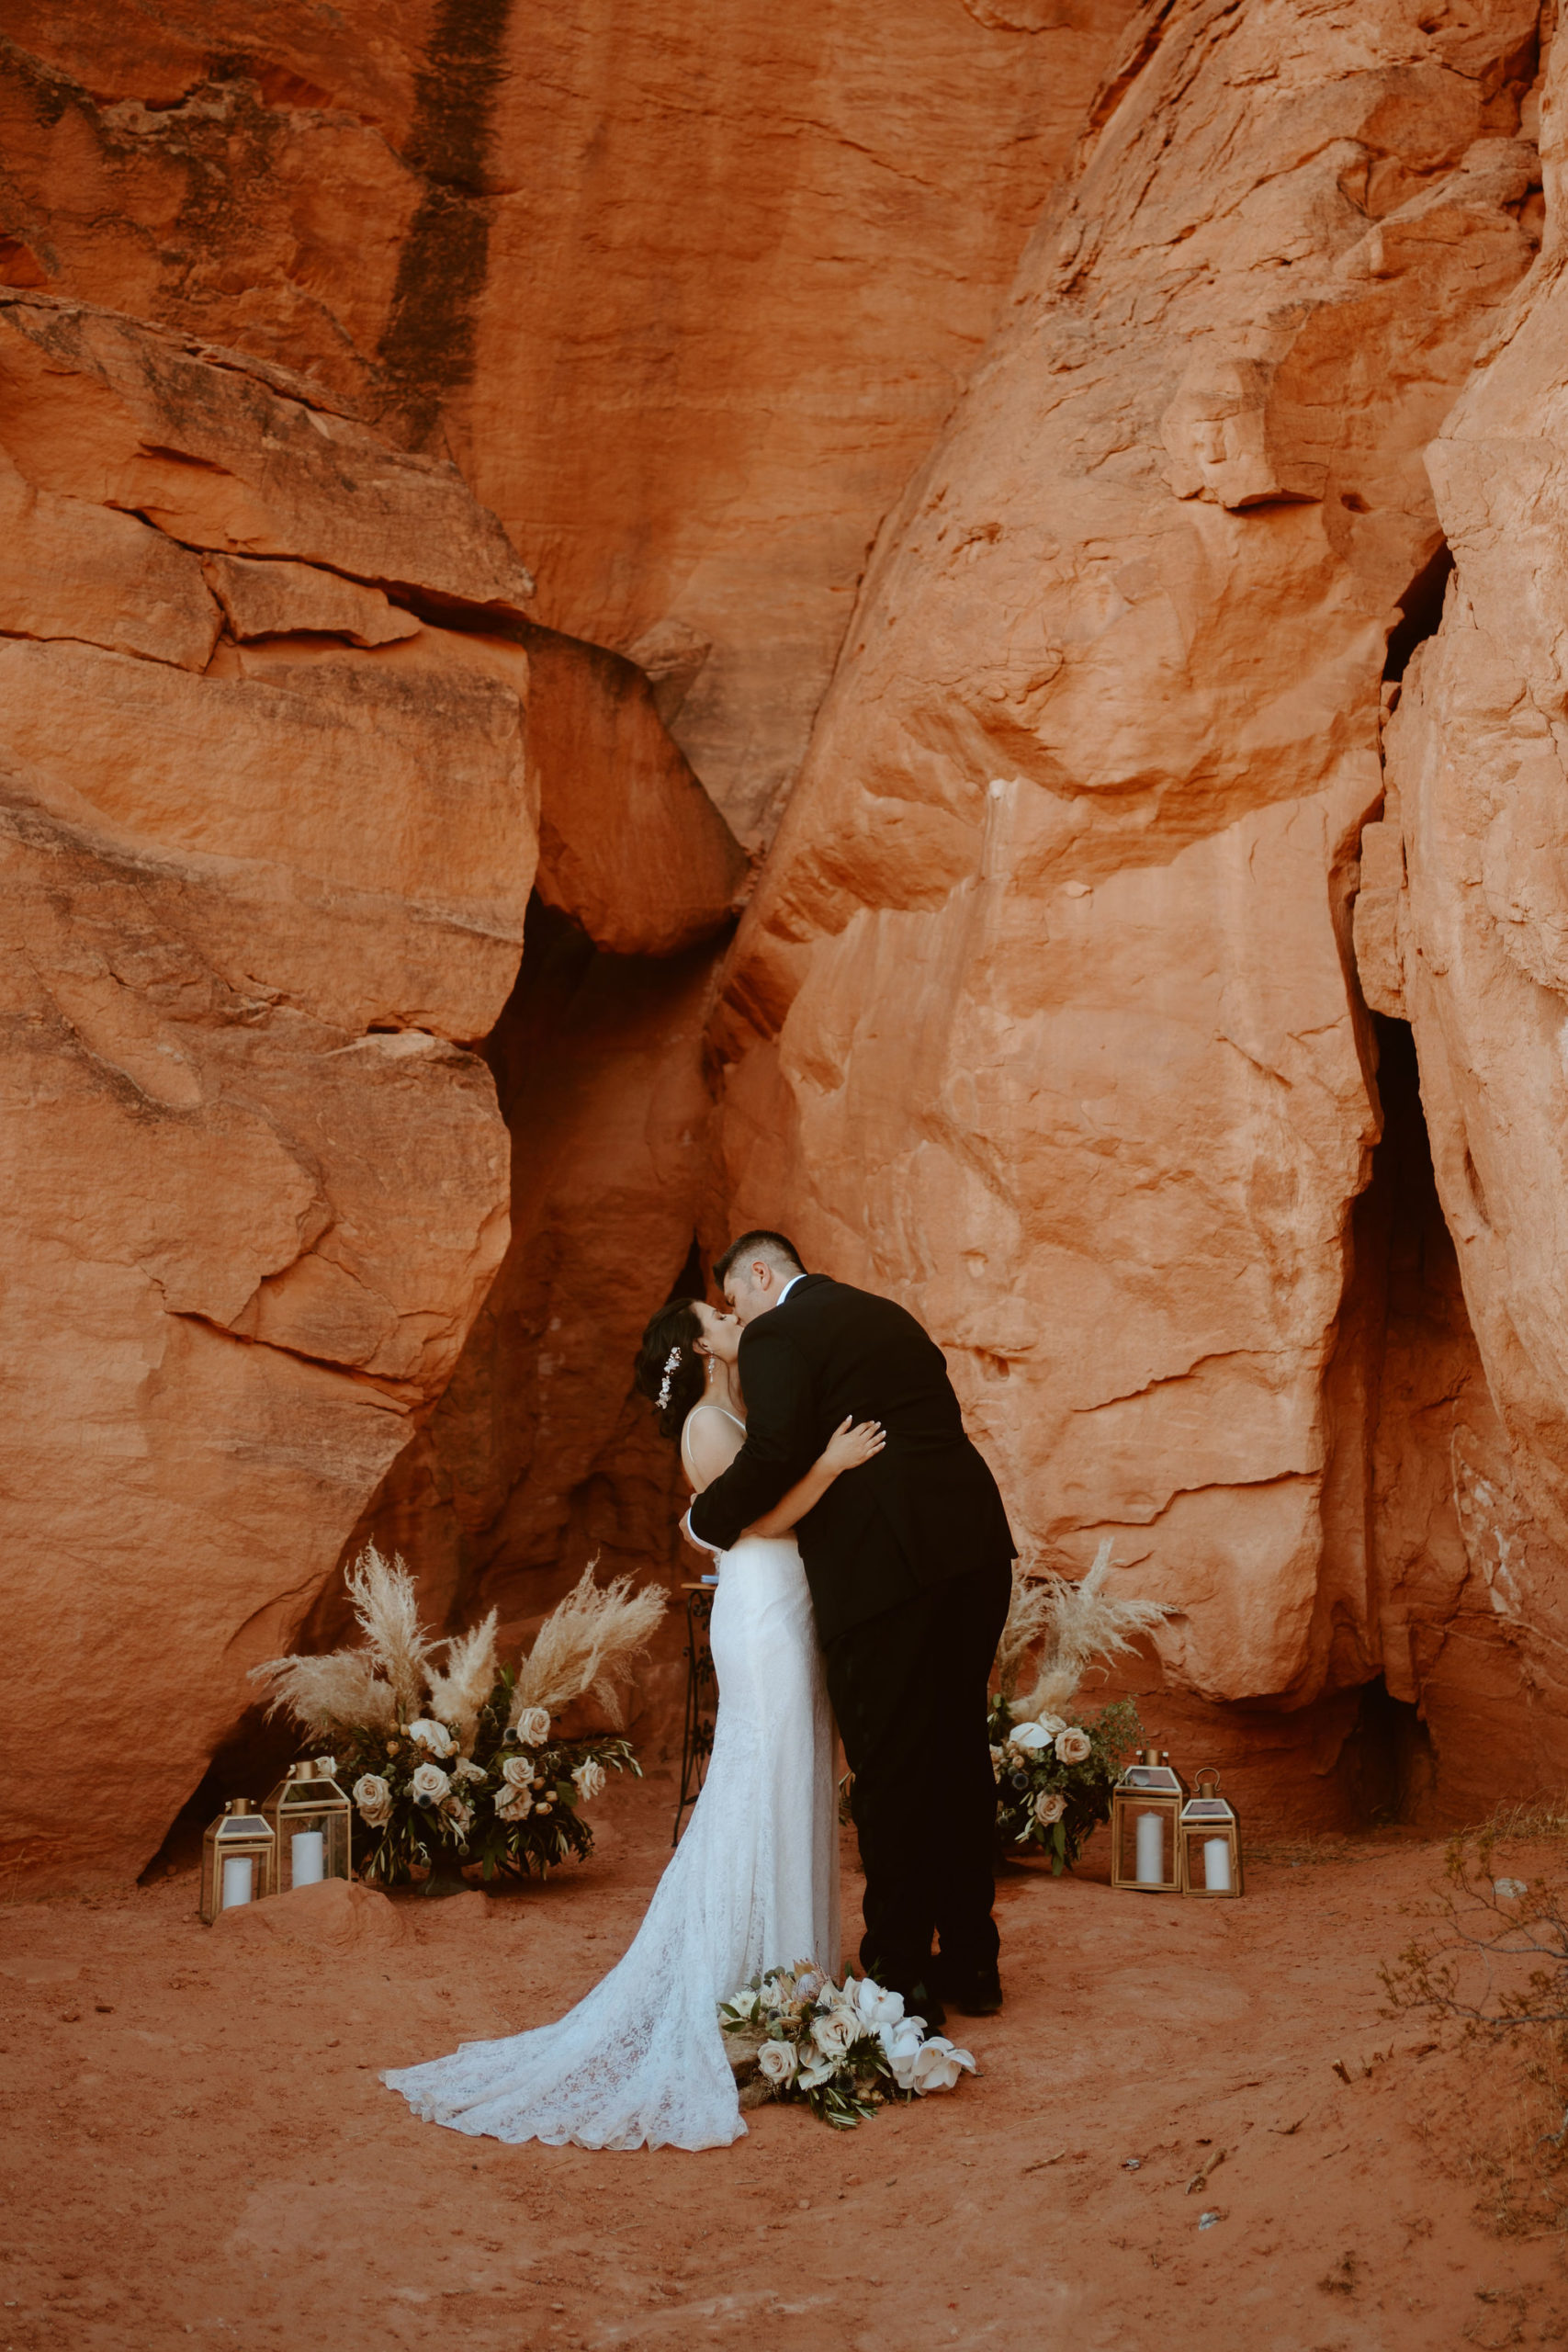 Bride & Groom's First Kiss as Newlyweds at Valley of Fire in Las Vegas 